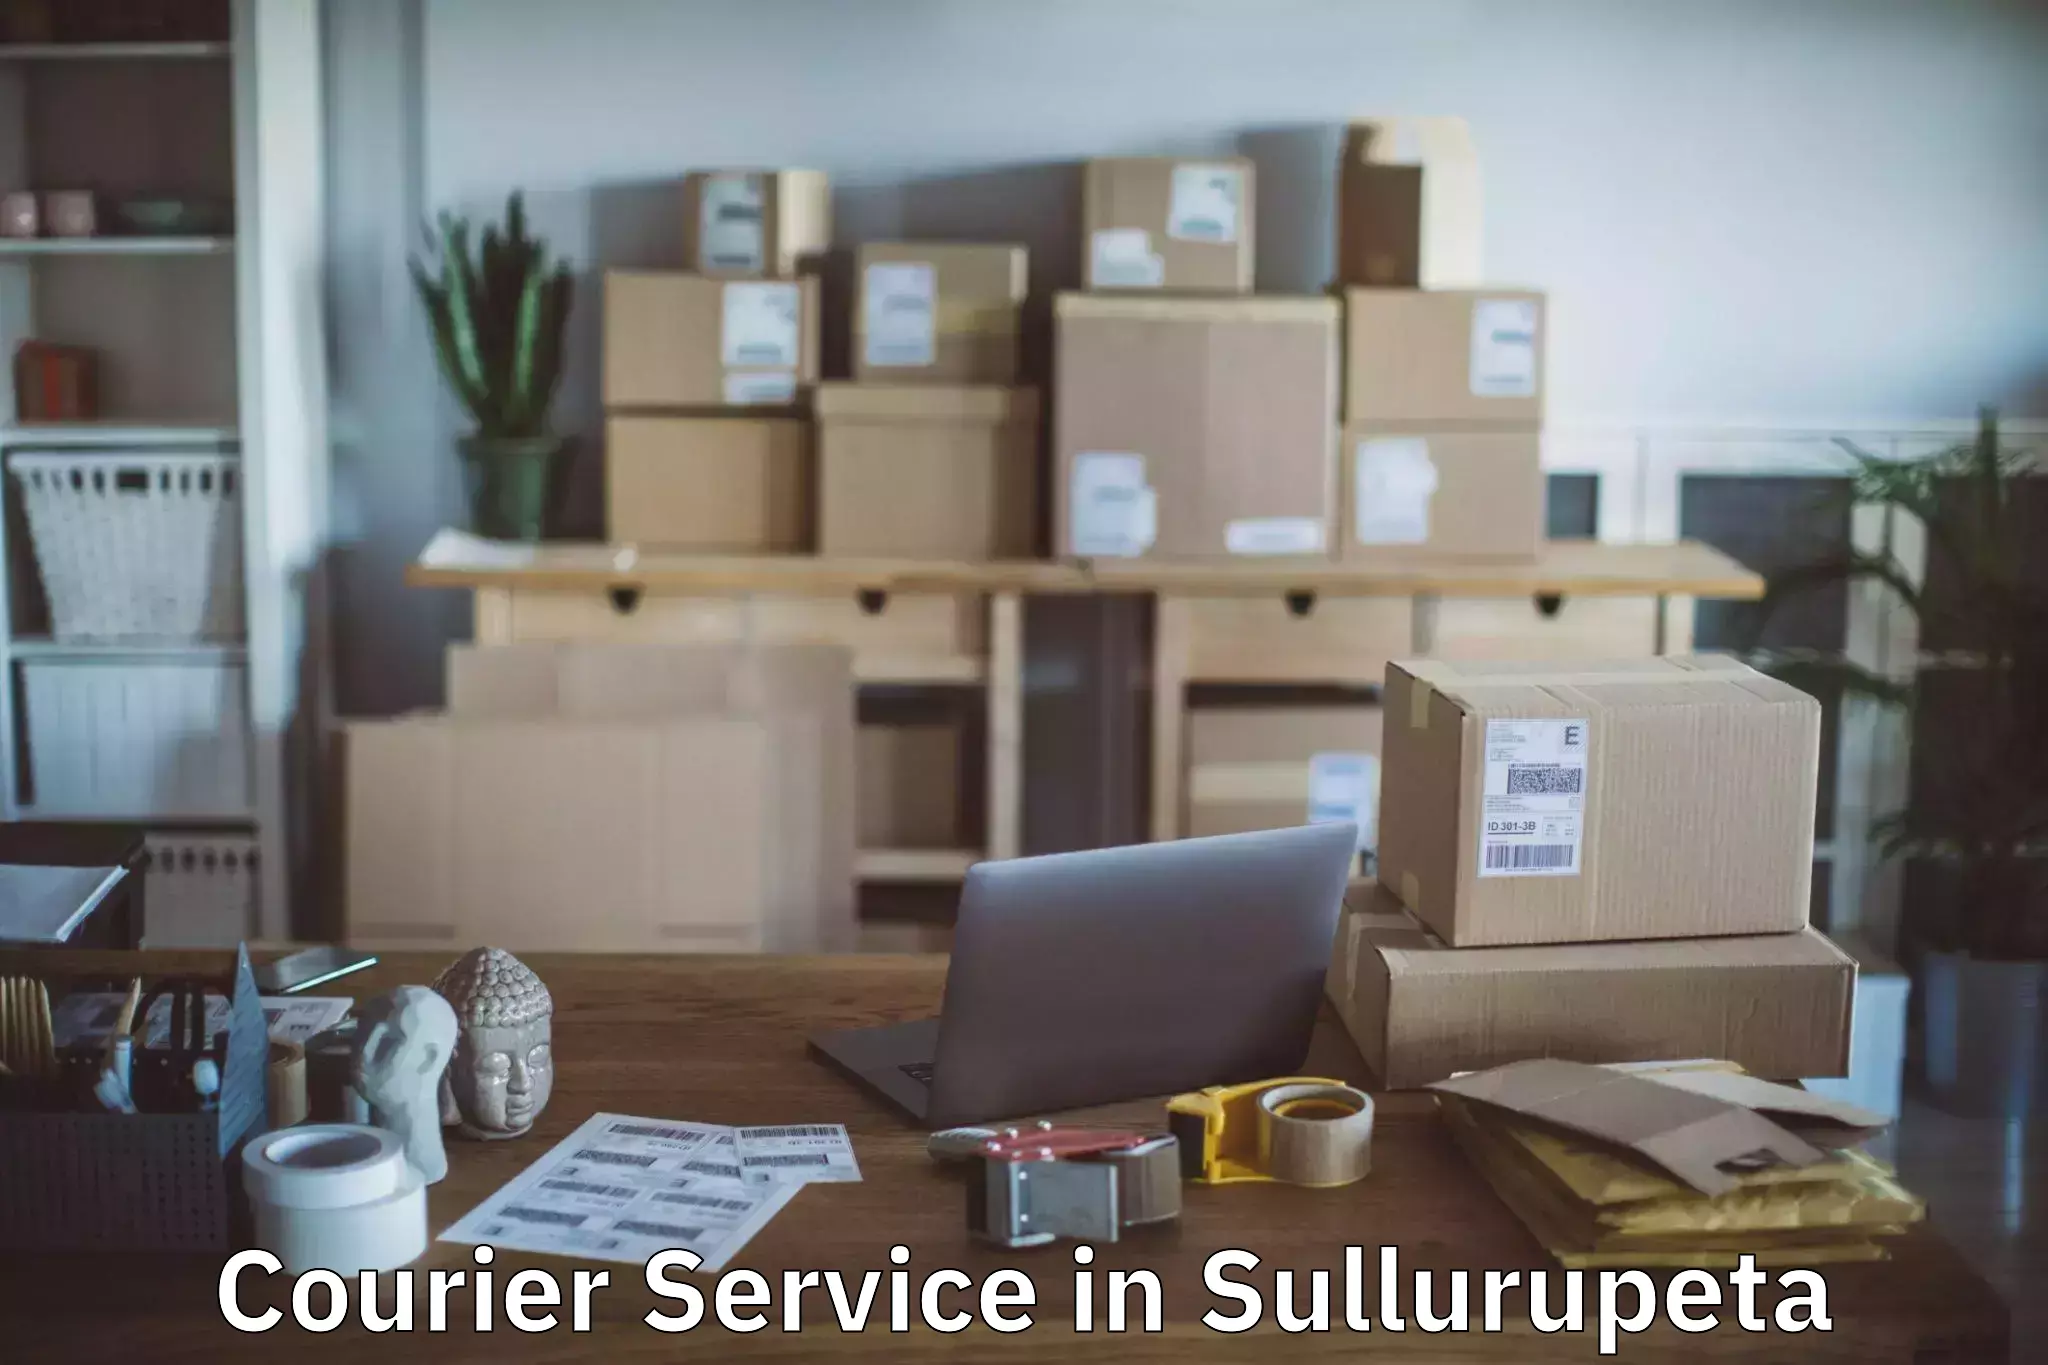 Sustainable delivery practices in Sullurupeta